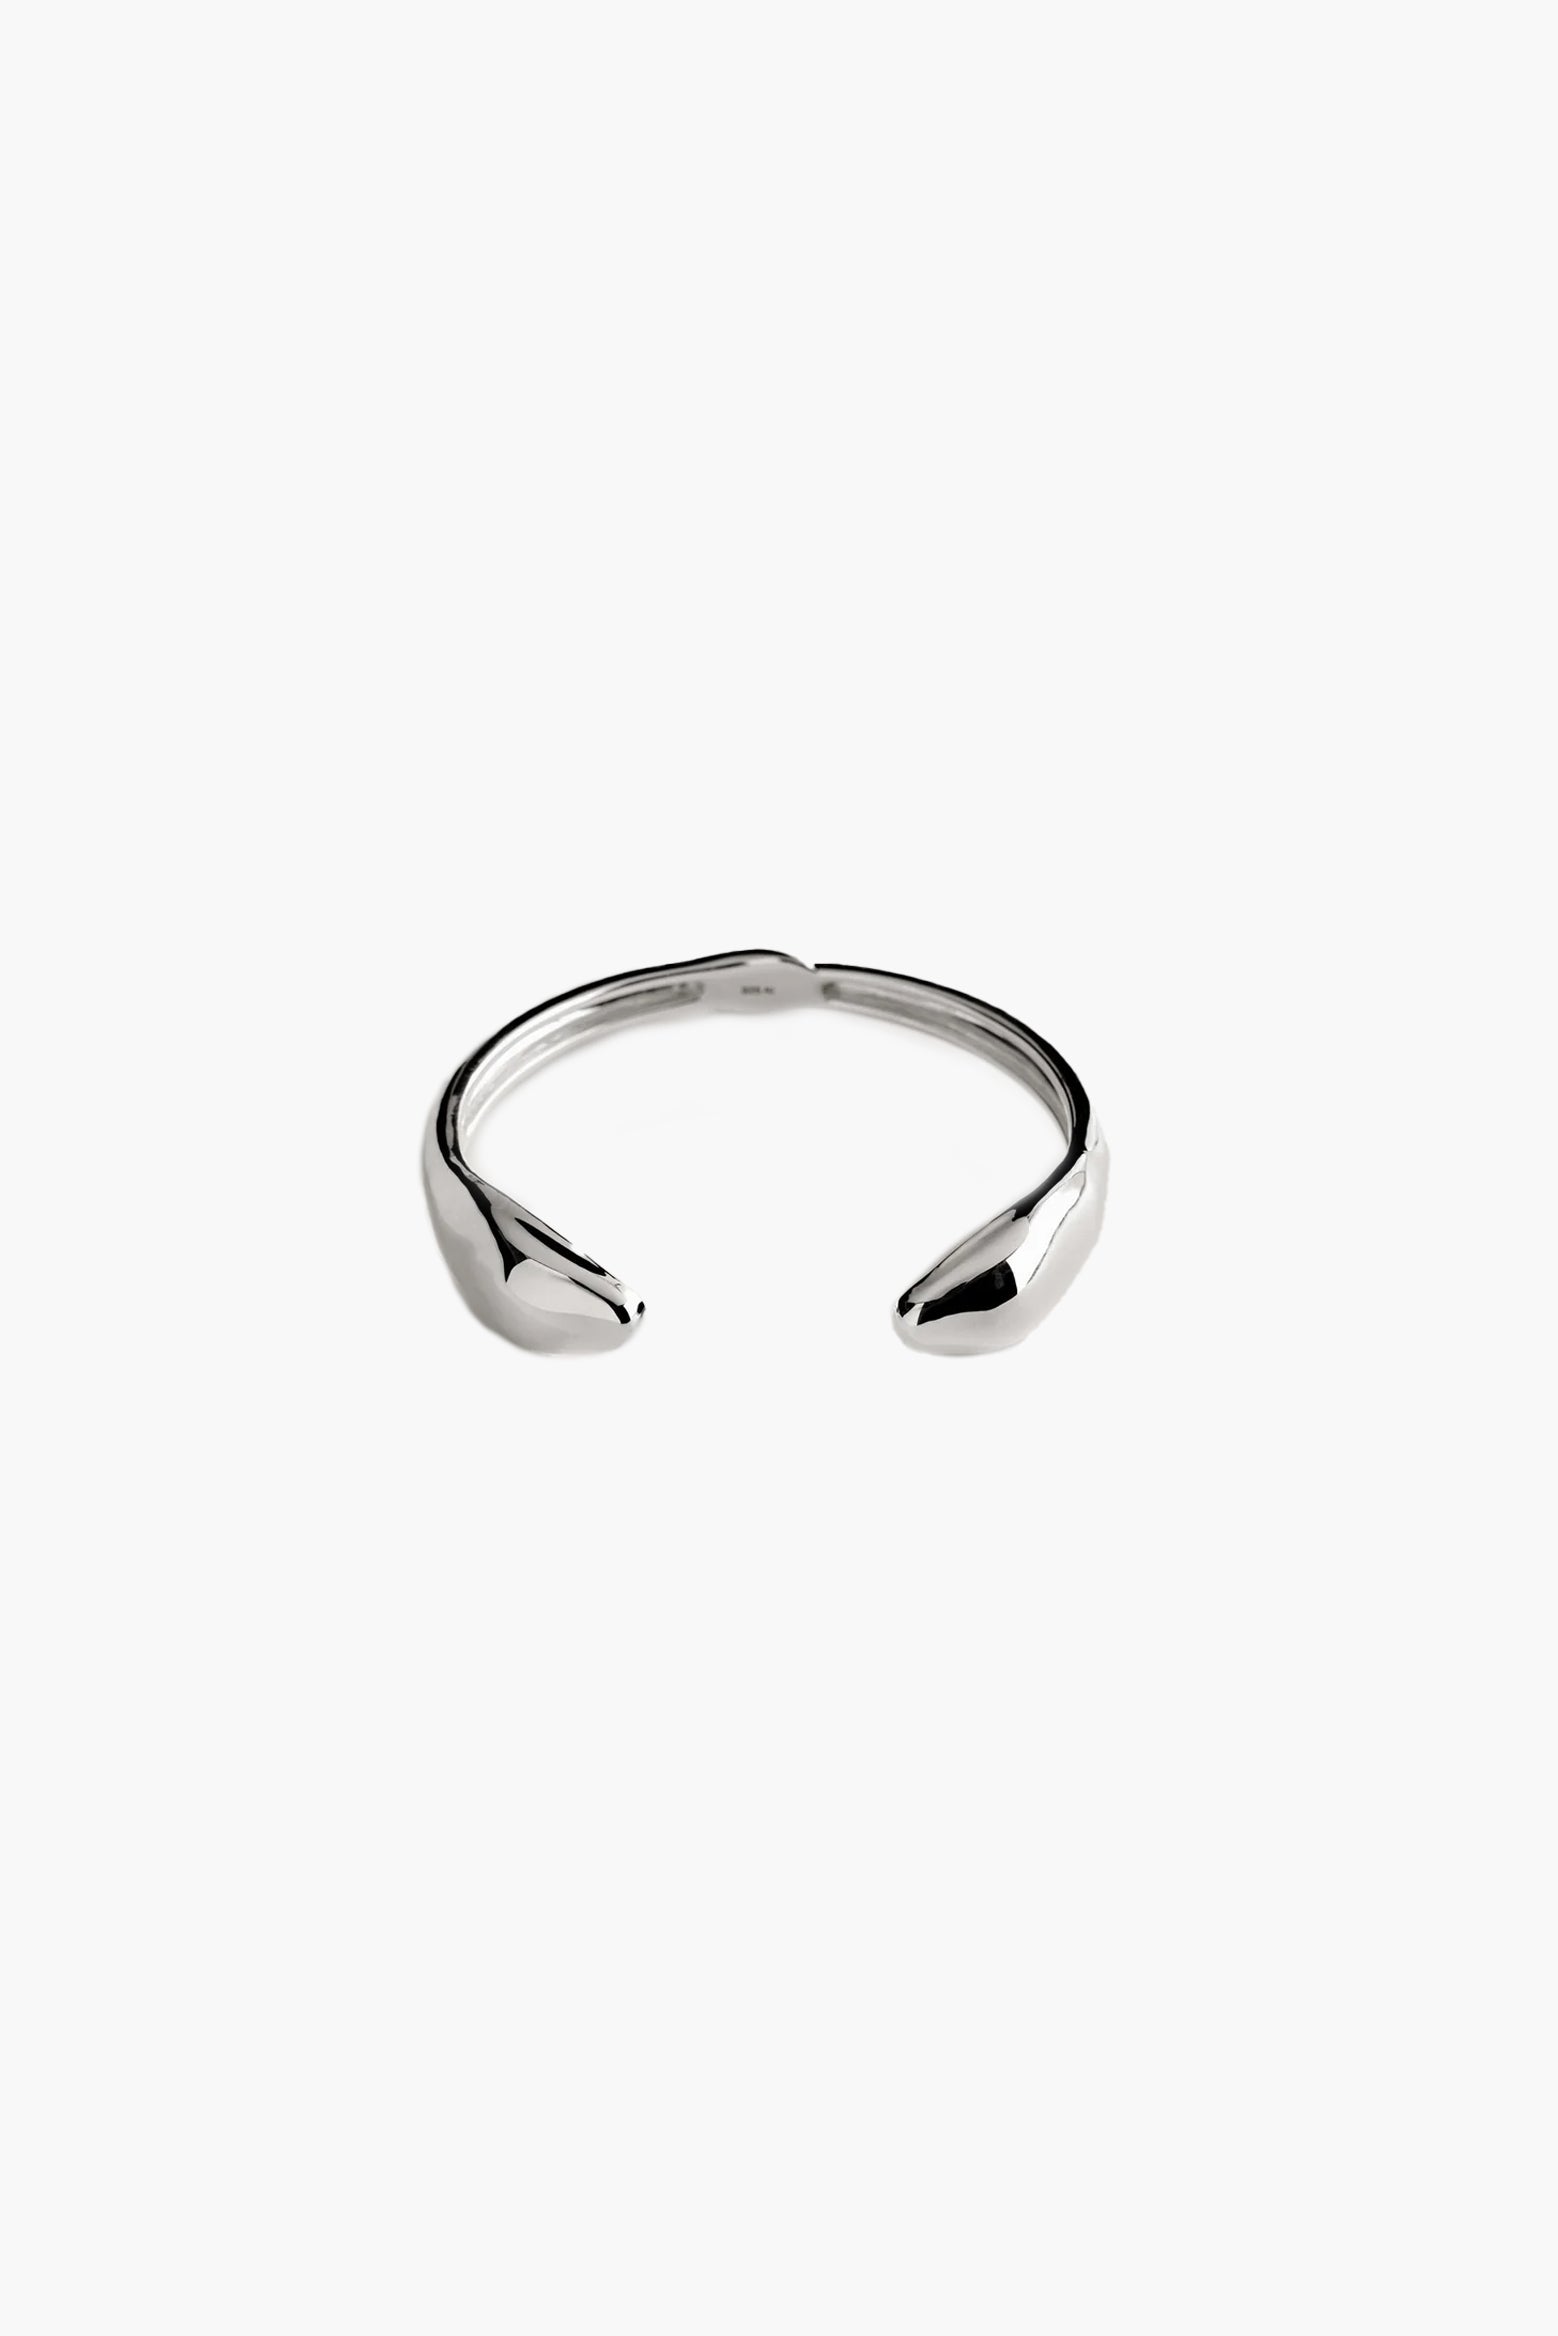 Annika Inez Serpent Cuff Bracelet in Silver available at The New Trend Australia.